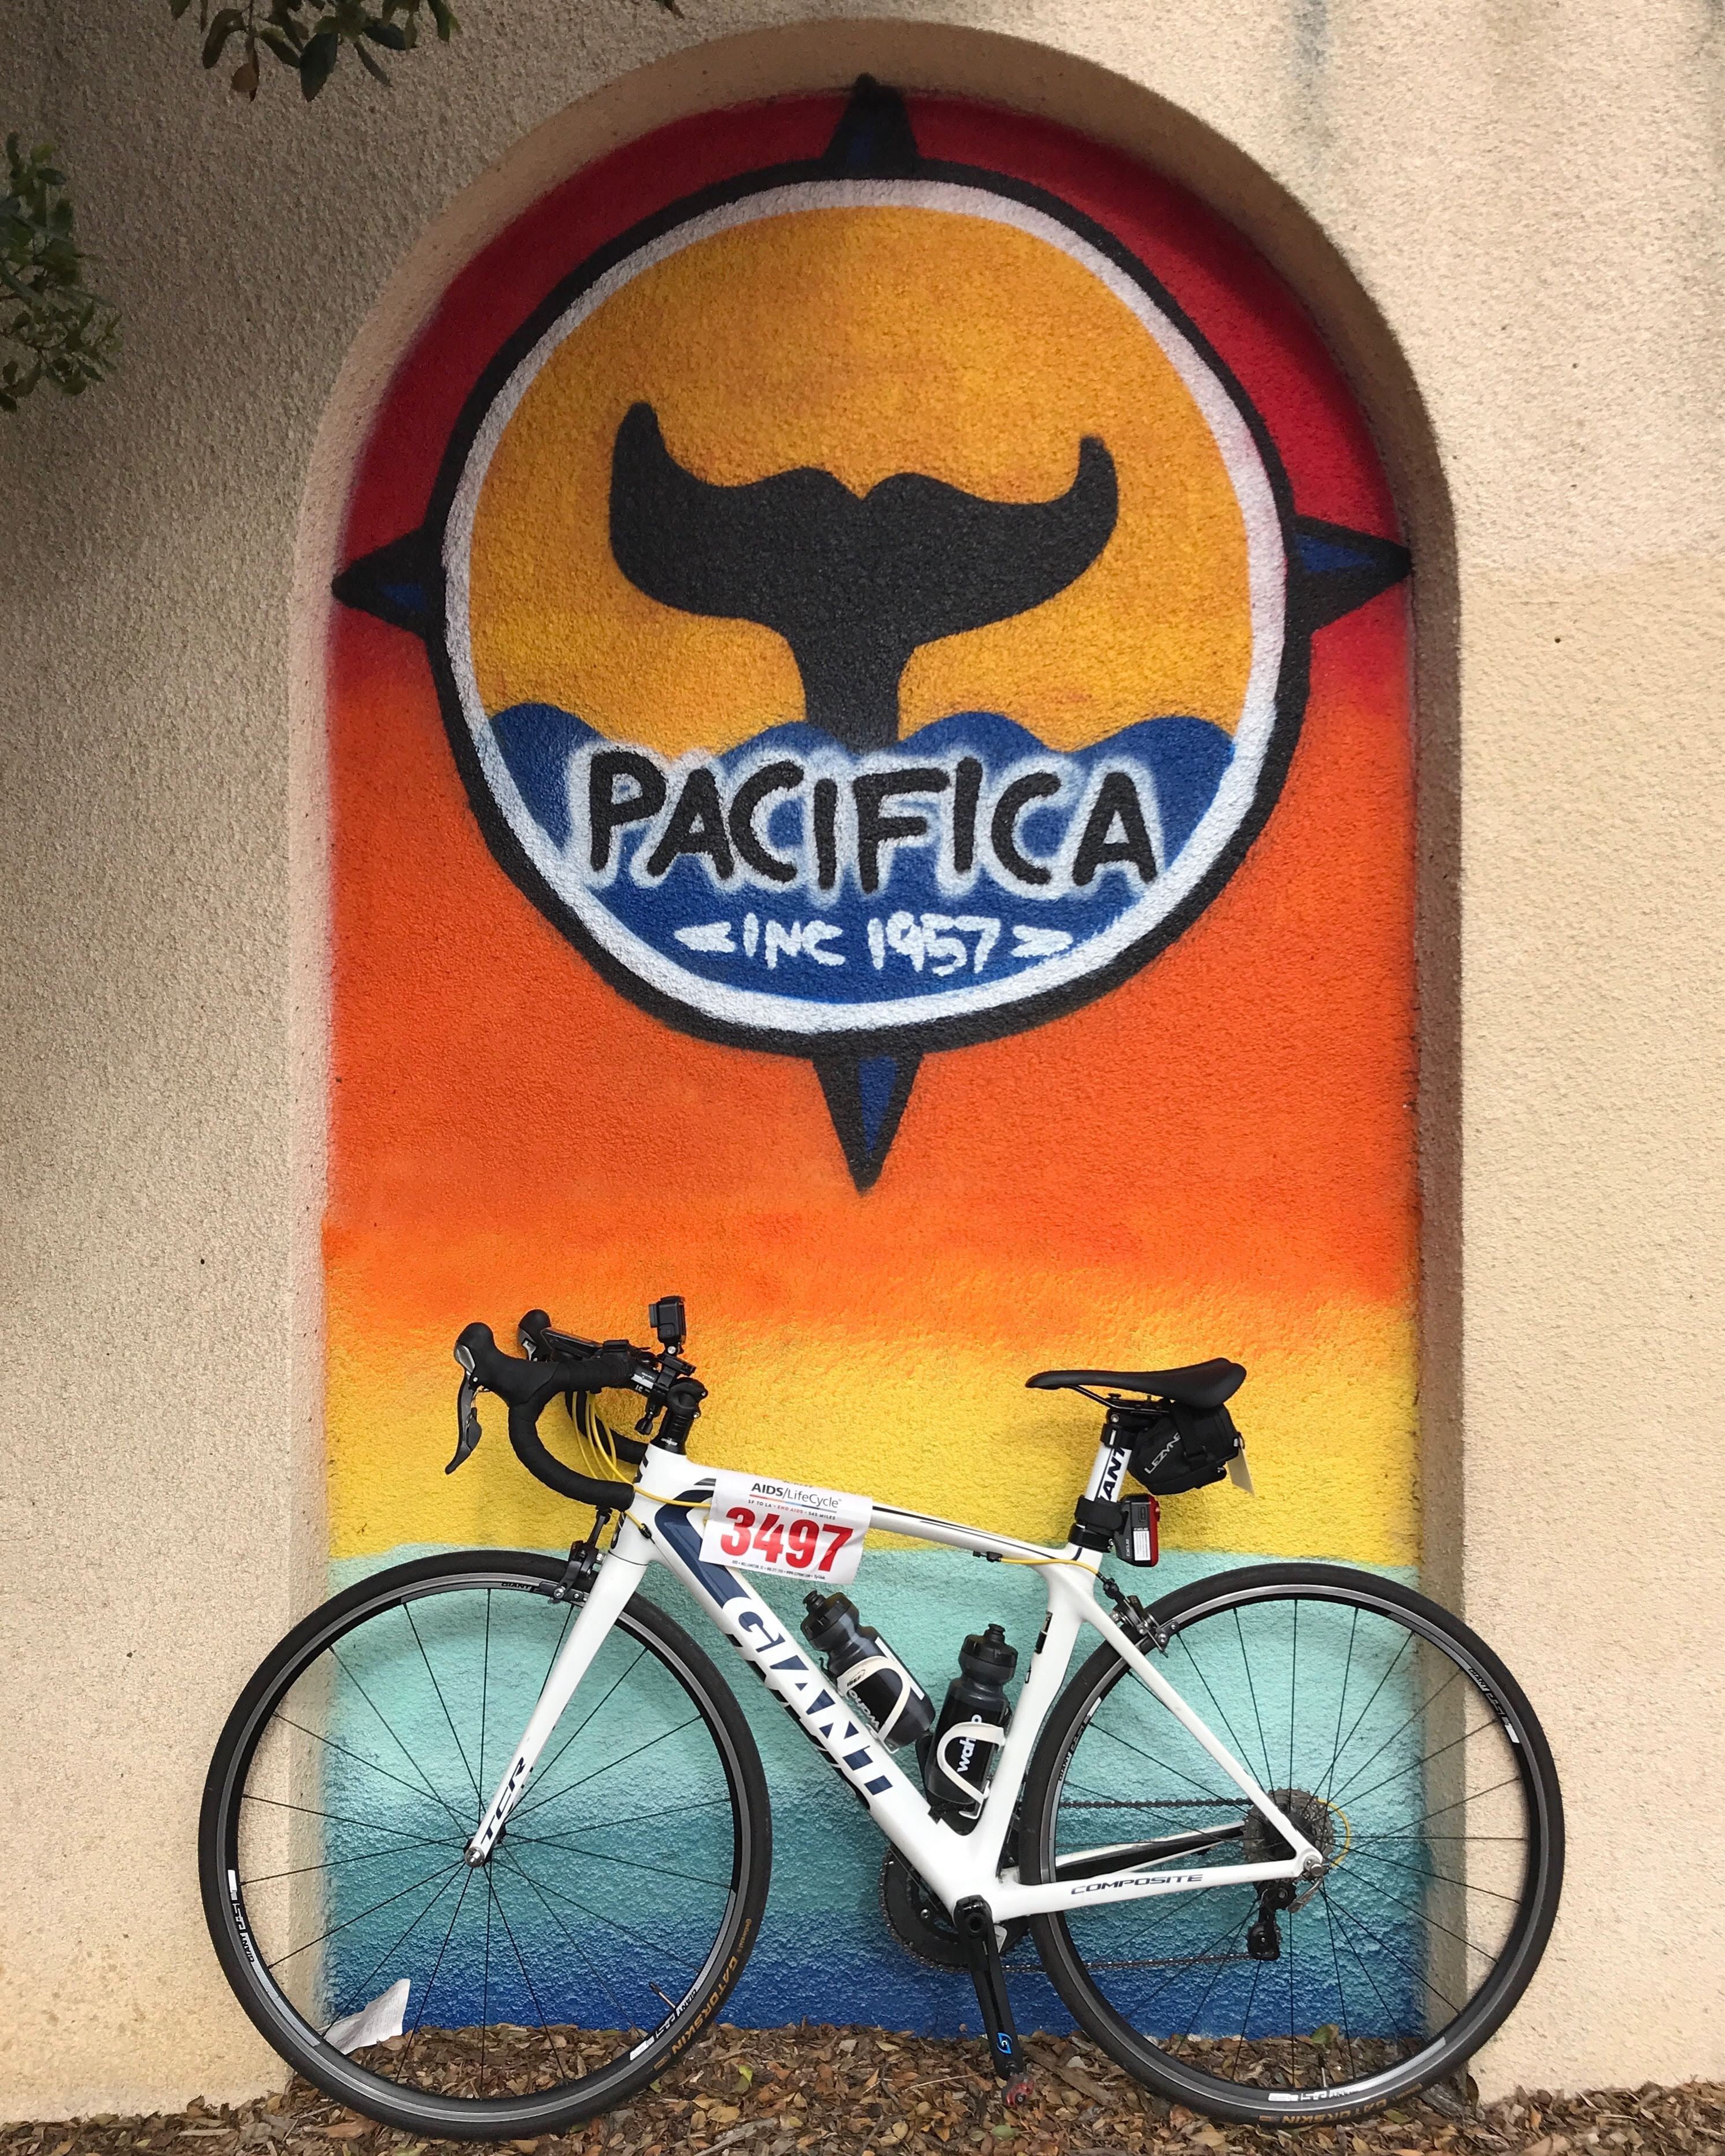 Pacifica mural